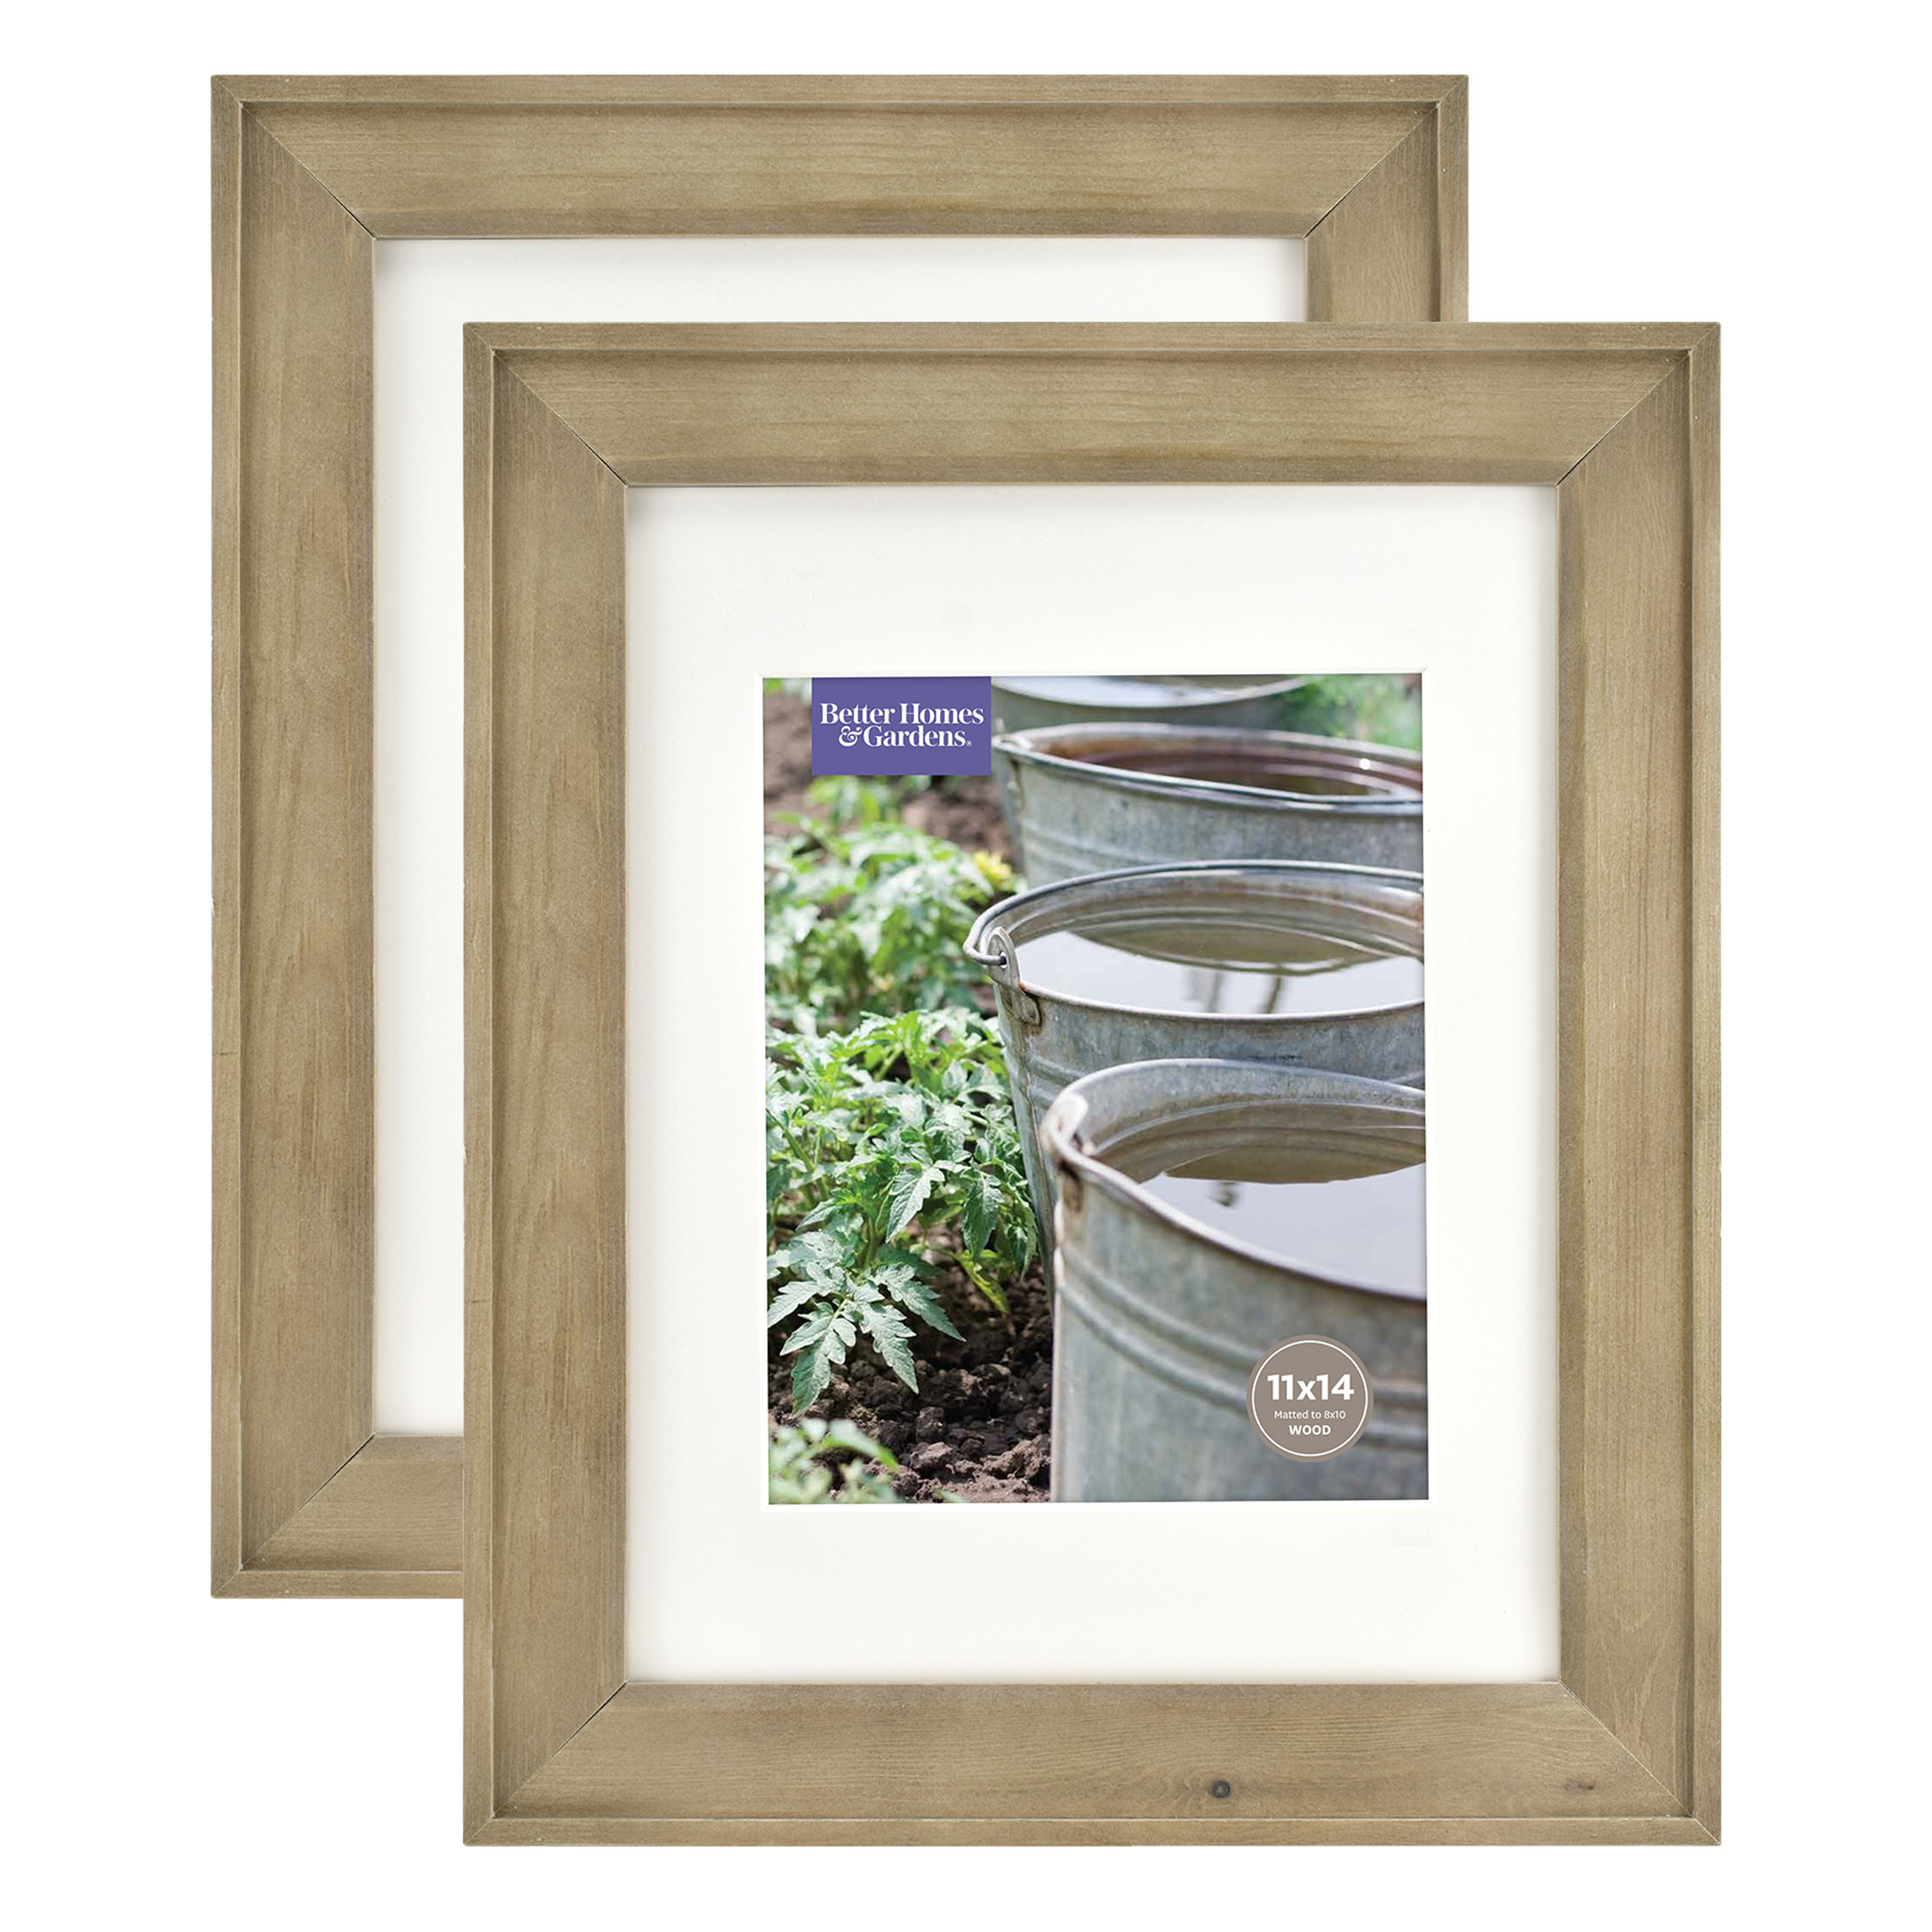 Better Homes & Gardens 11x14/8x10 Rustic Wood Picture Frame, 2pk - image 1 of 5